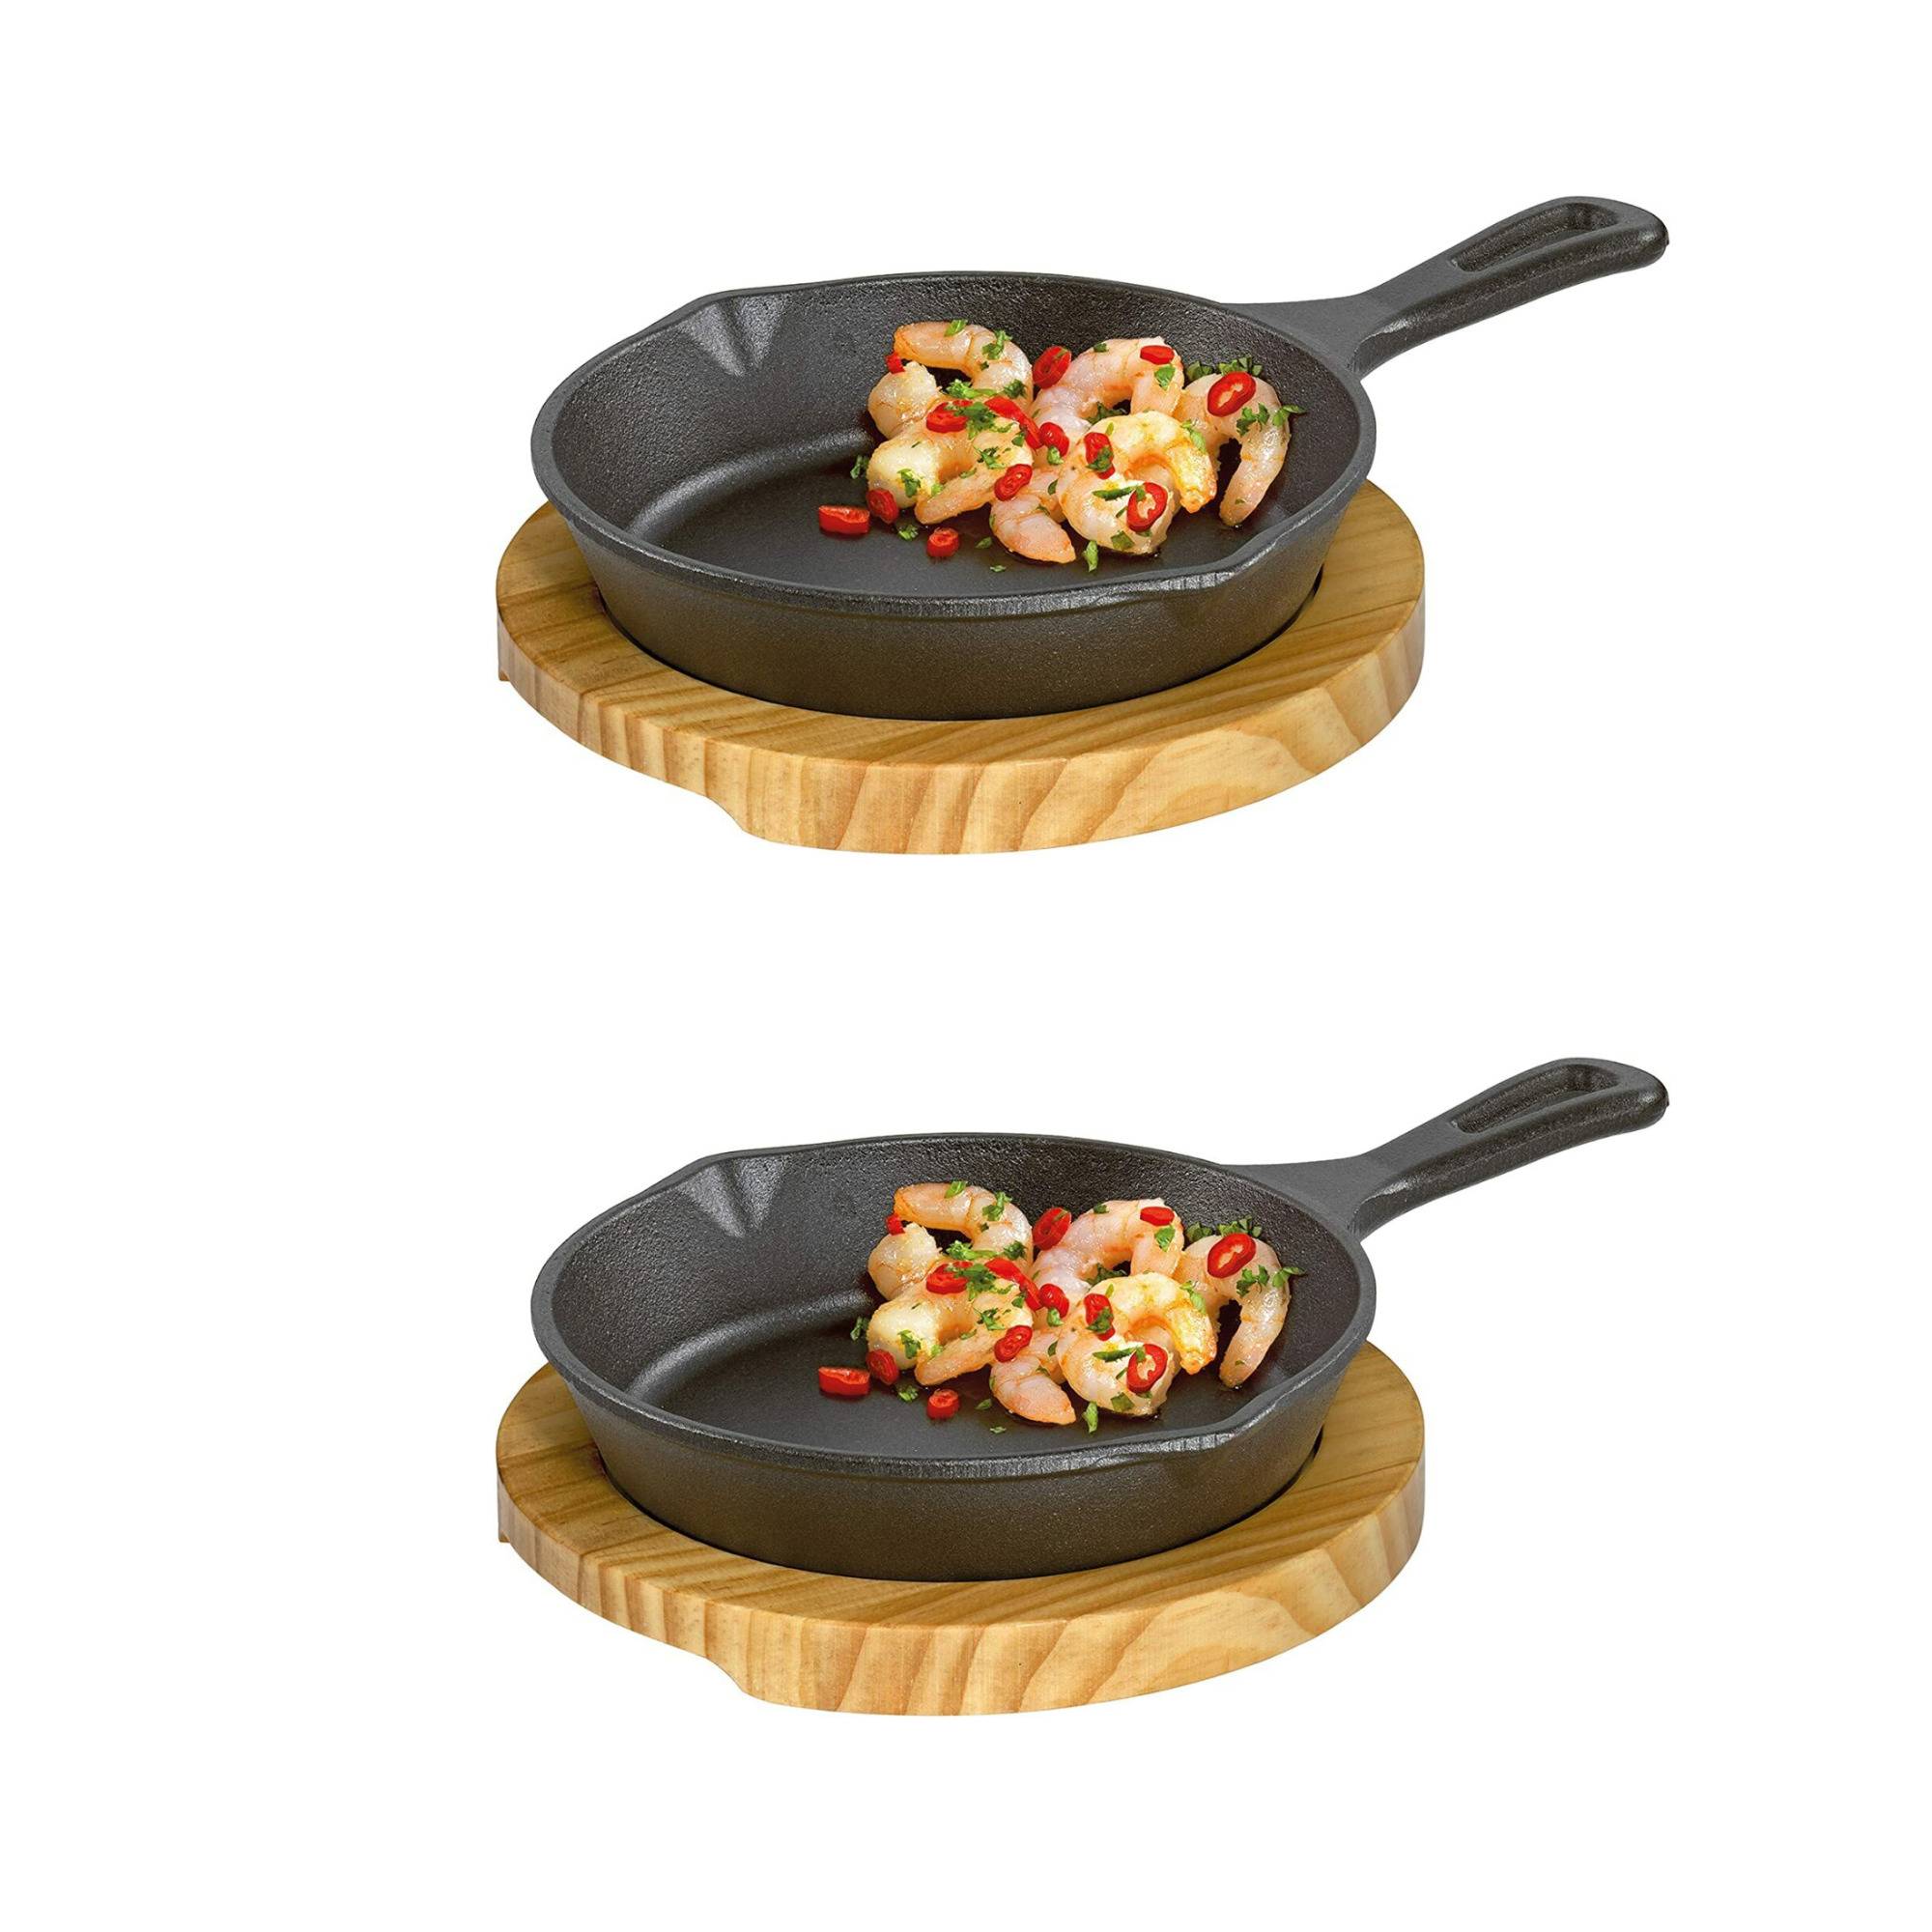 Kuechenprofi Serving Pan Round With Wooden Board (2 pack)